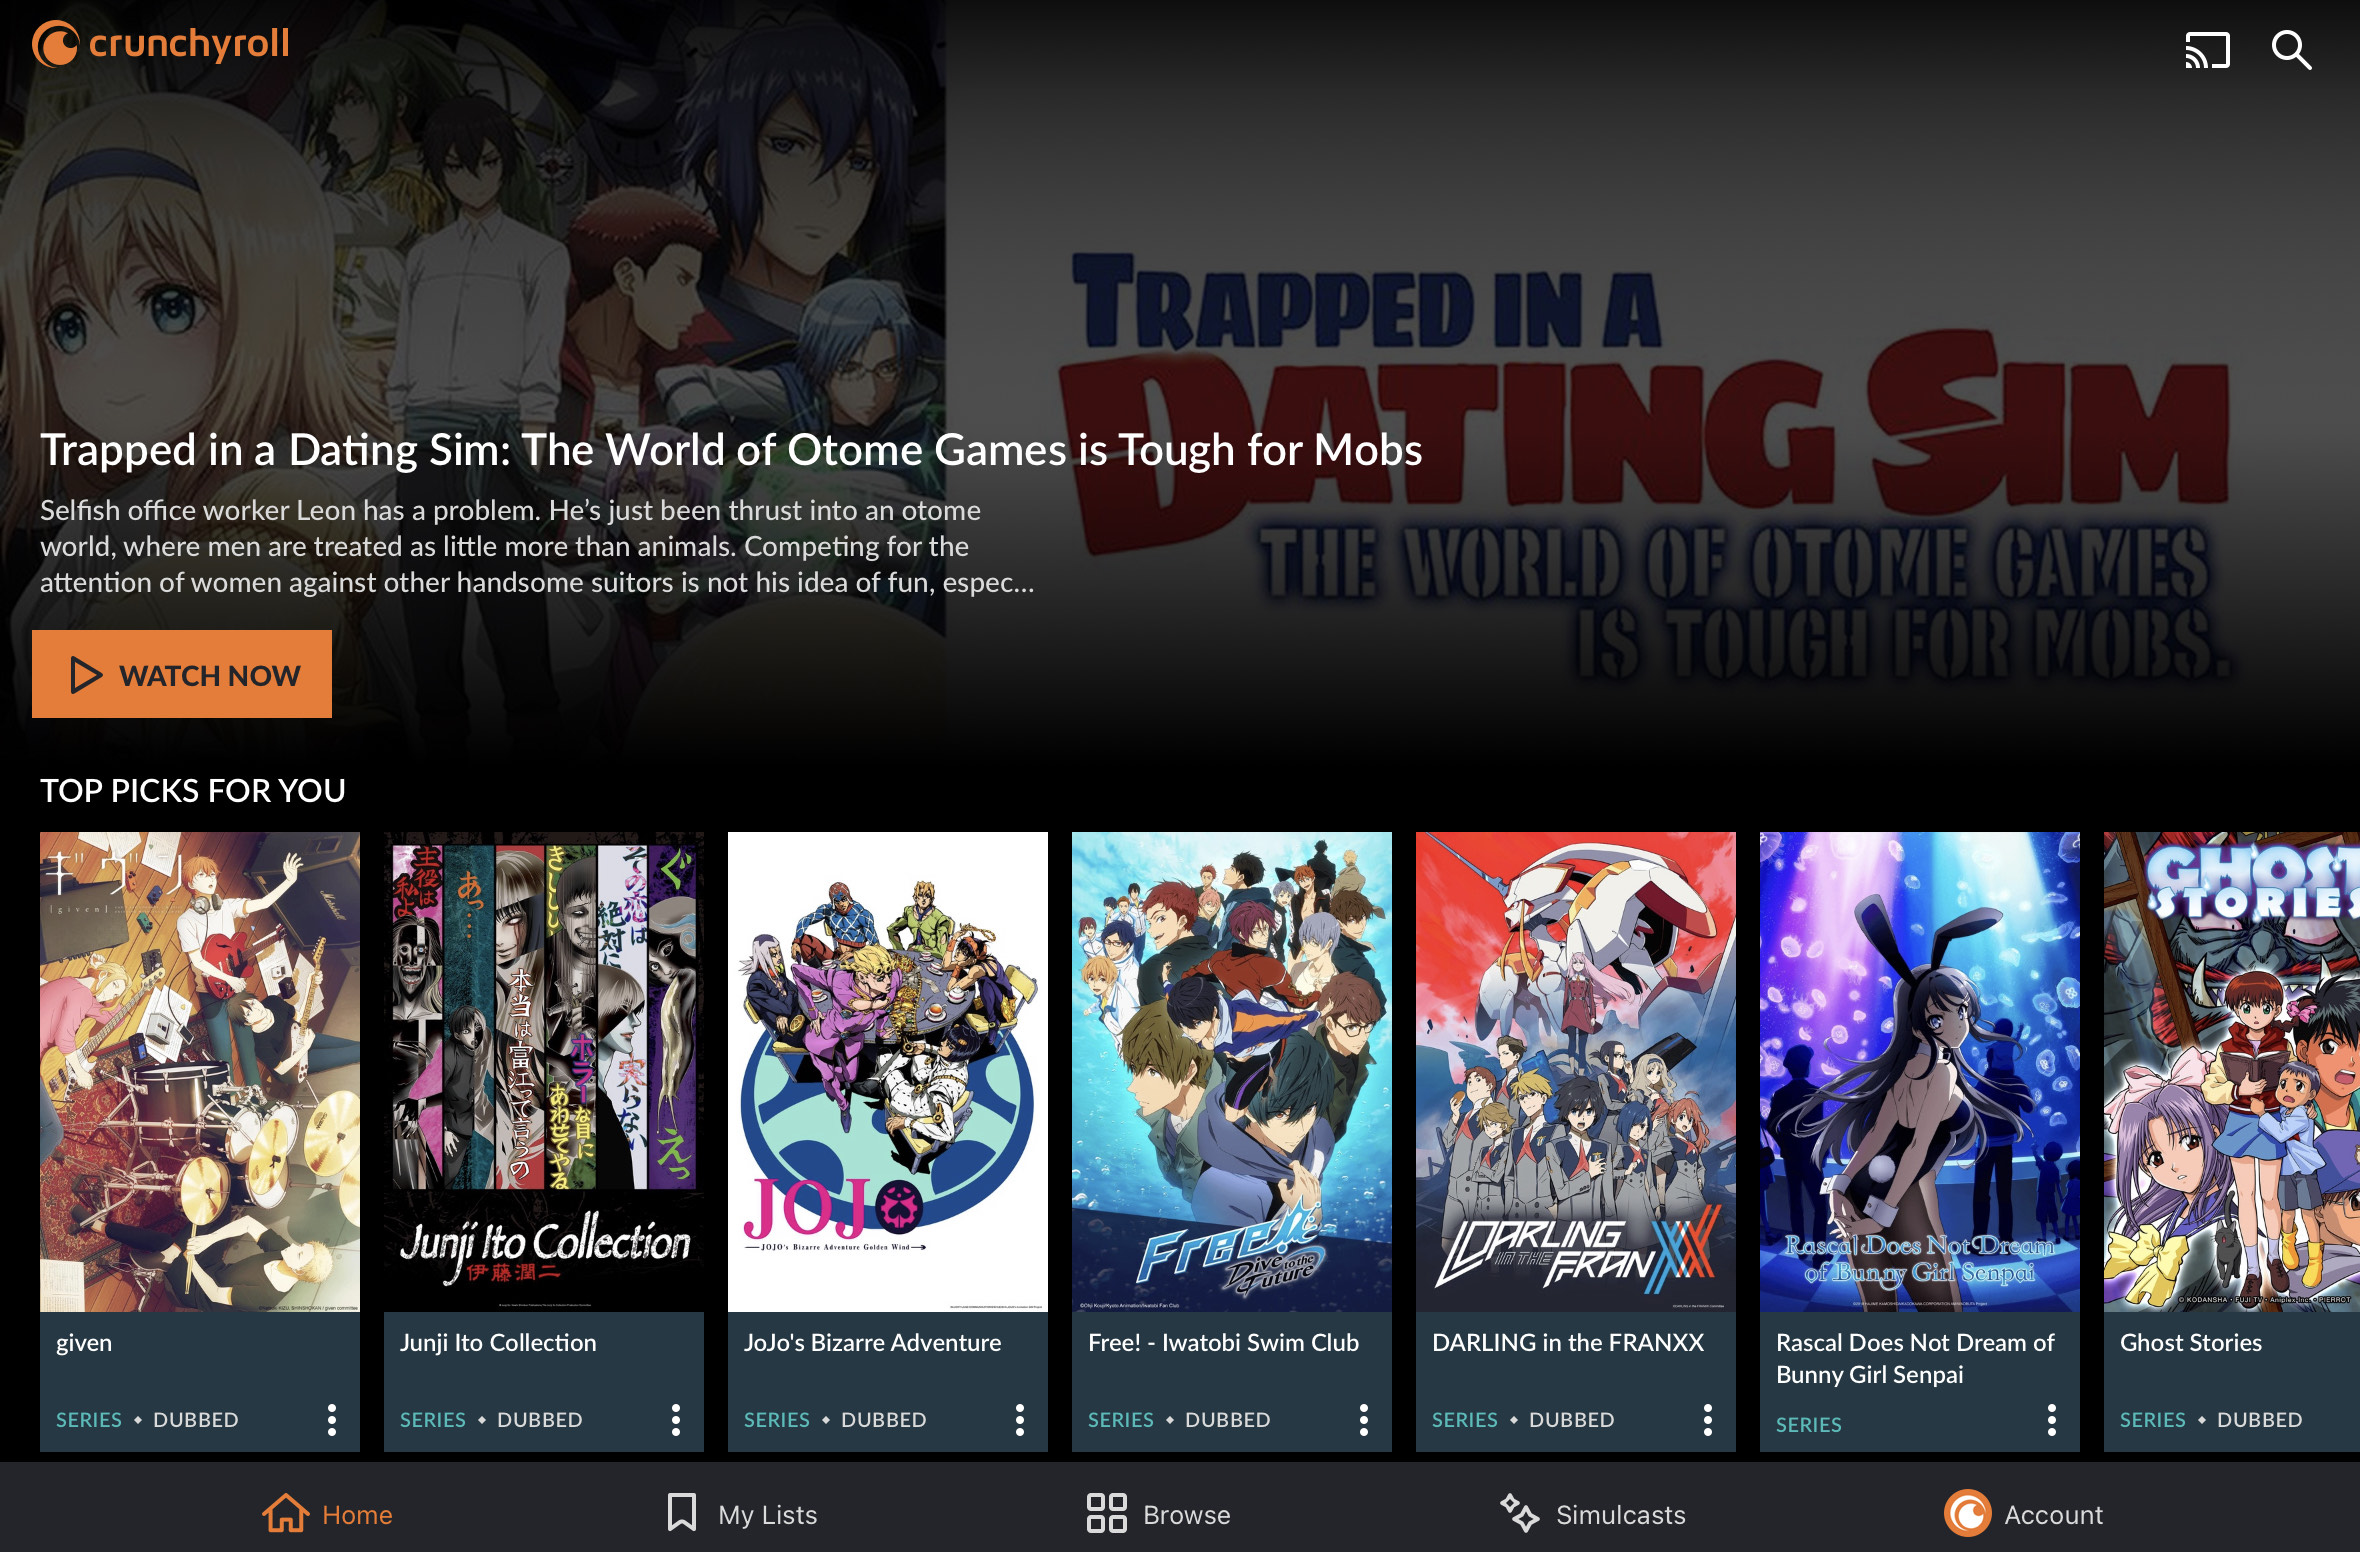 27 Best Anime on HBO Max to Stream  Ivacy VPN Blog